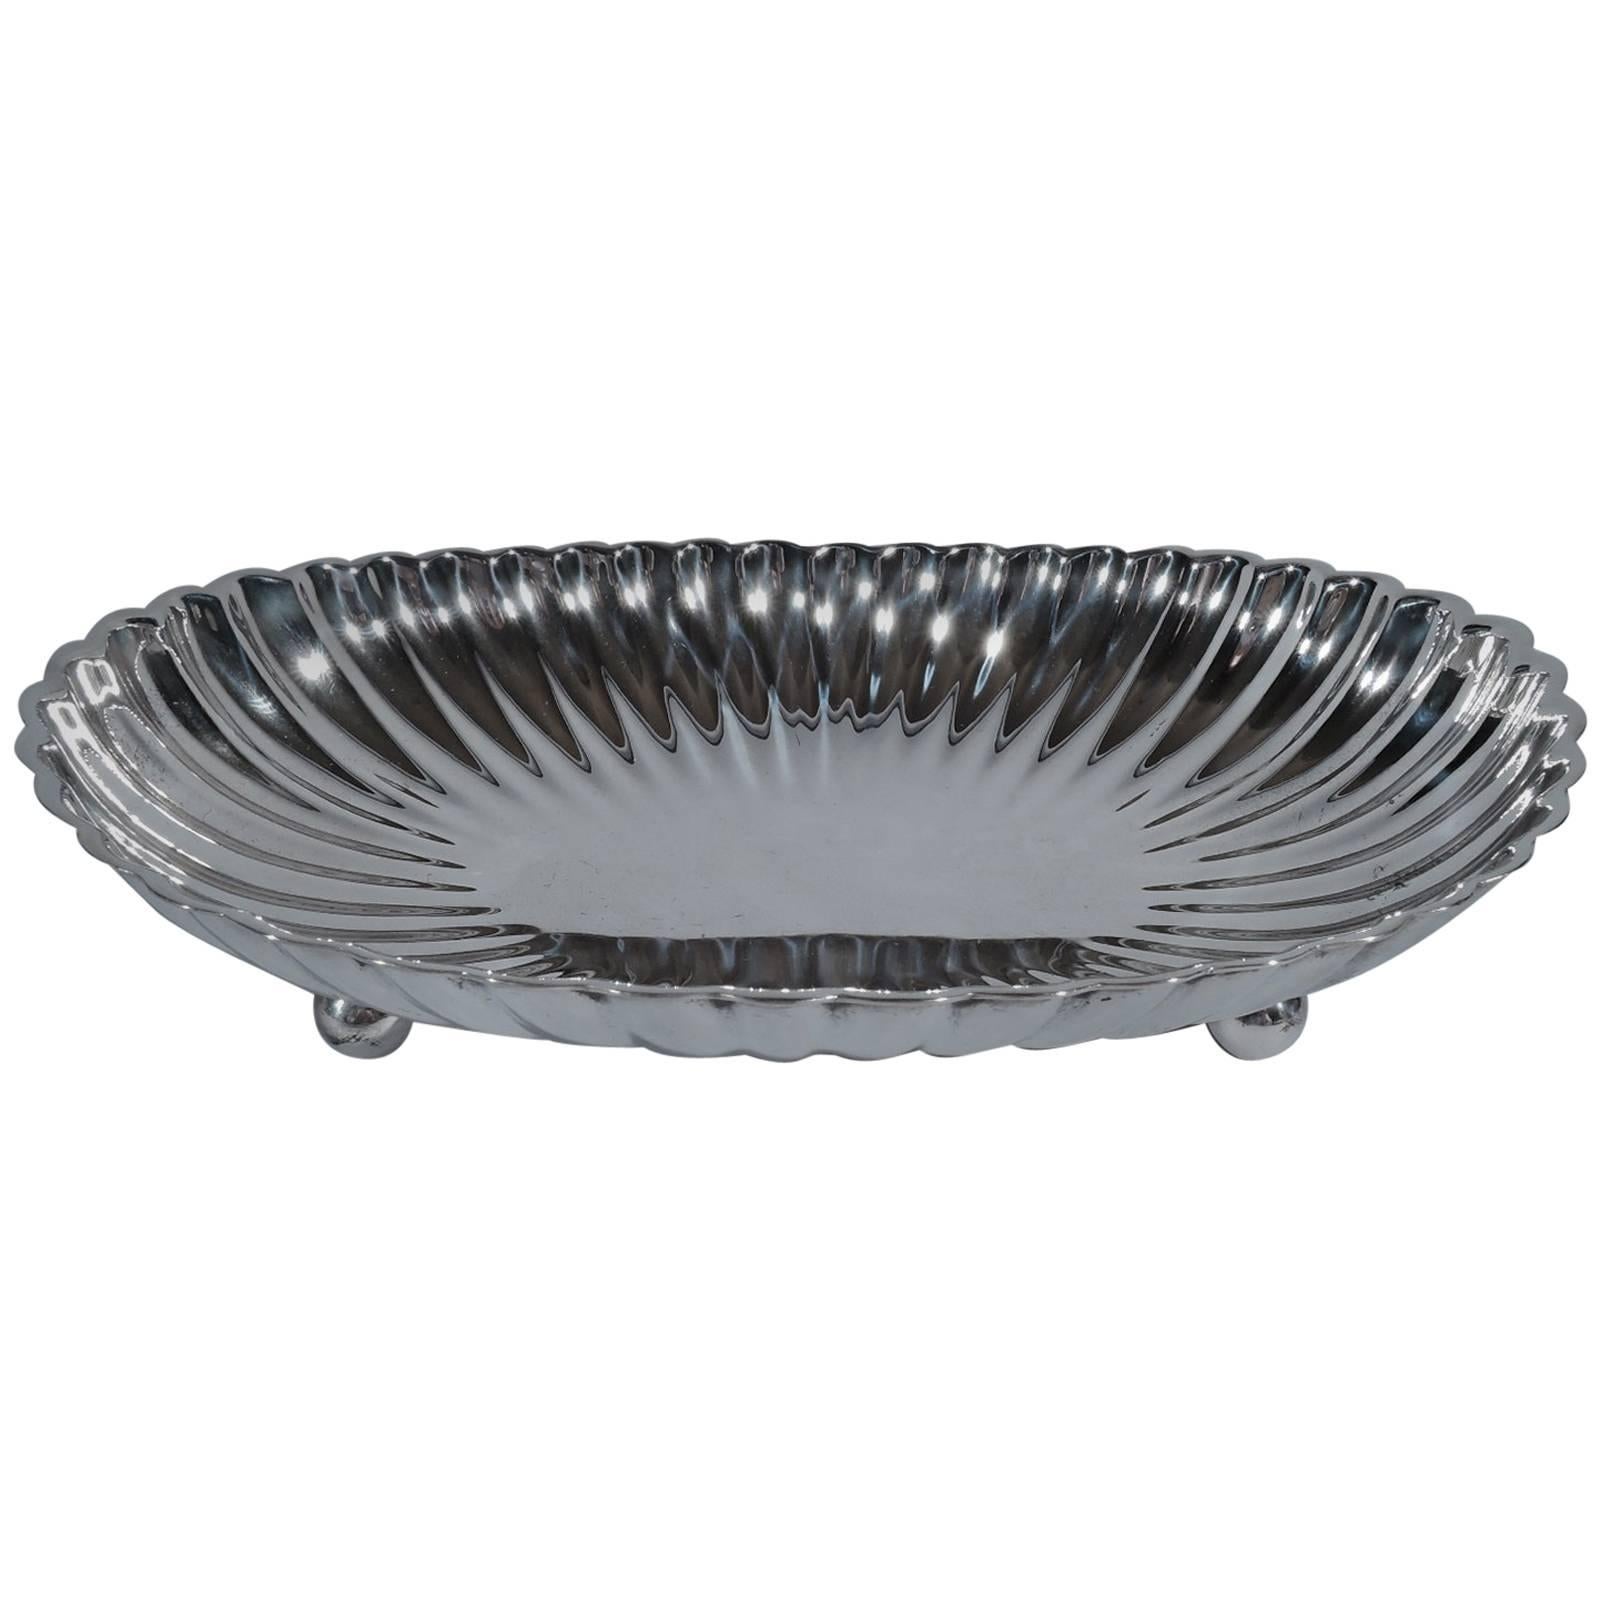 Gorham Sterling Silver Oval Bowl in Leamington Pattern